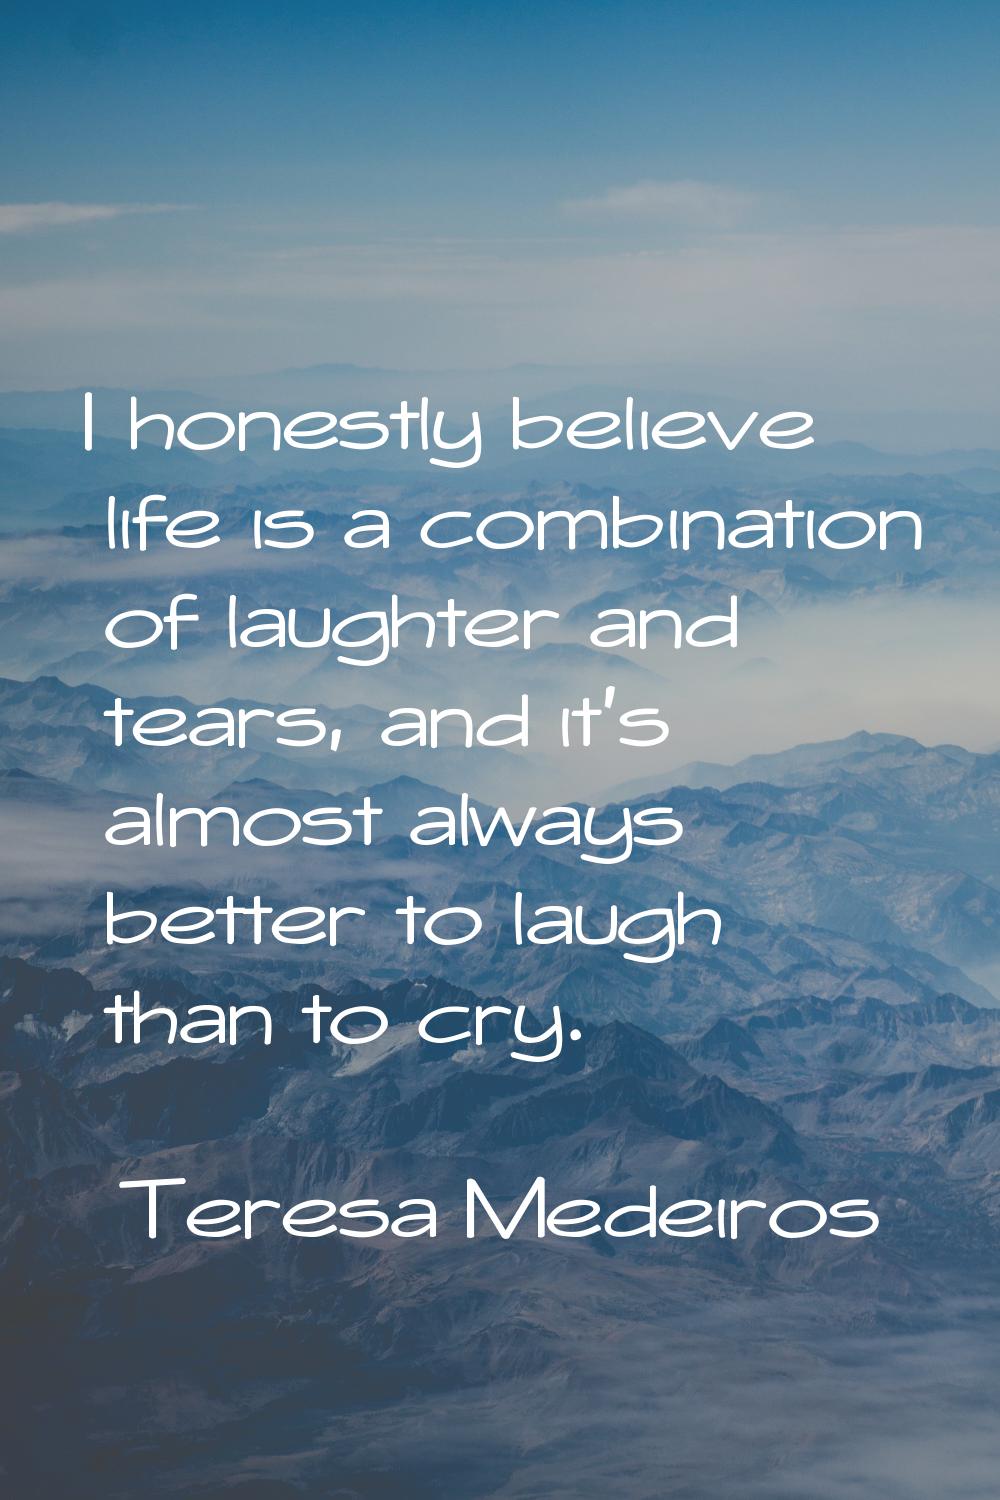 I honestly believe life is a combination of laughter and tears, and it's almost always better to la